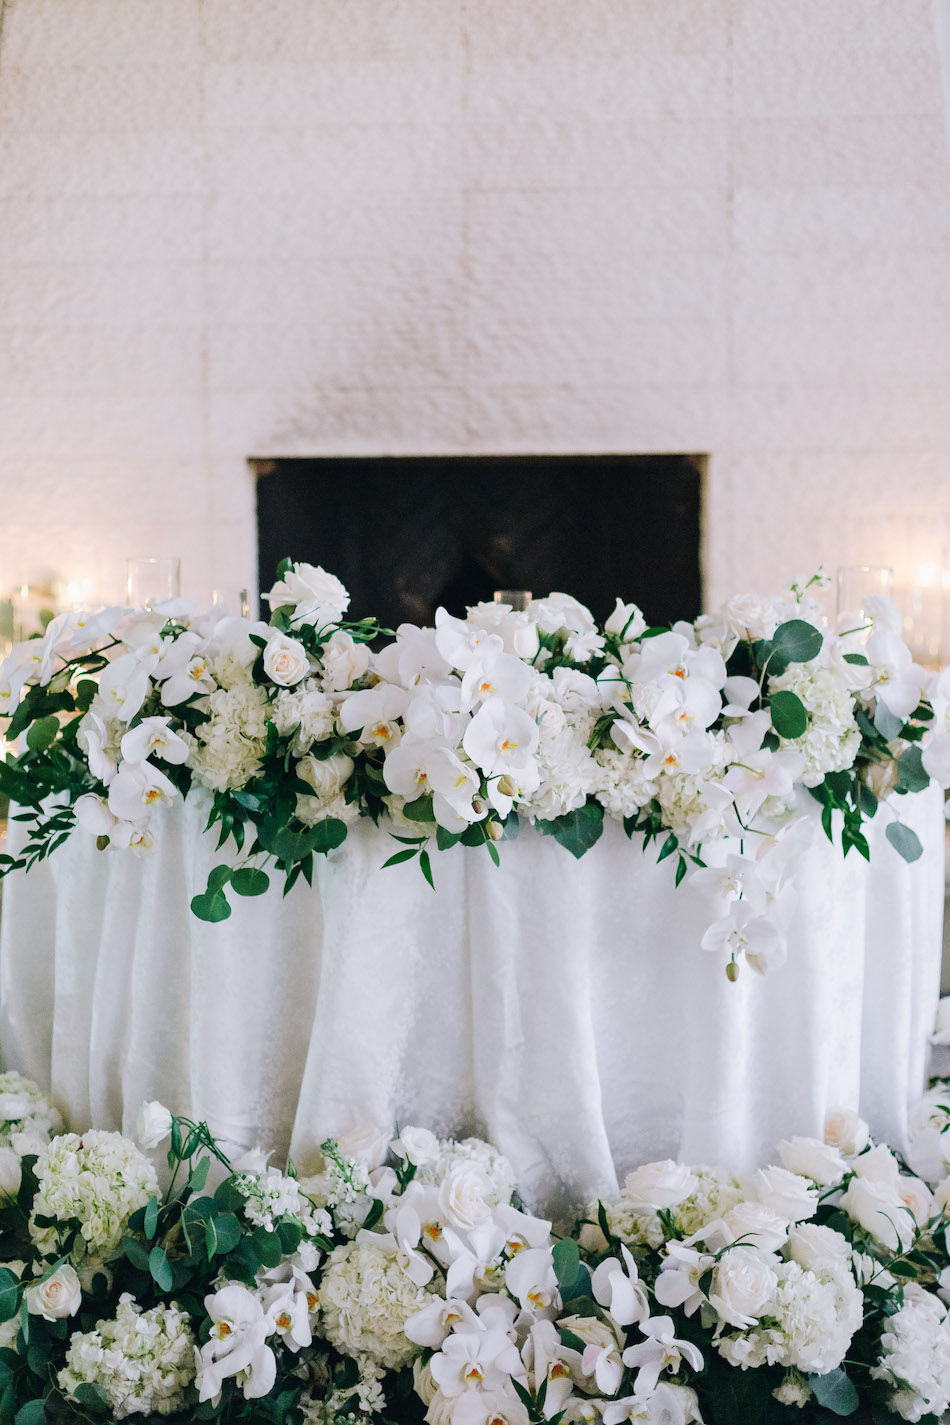 sweetheart table, white florals, white centerpiece, floral design, florist, wedding florist, wedding flowers, orange county weddings, orange county wedding florist, orange county florist, orange county floral design, flowers by cina